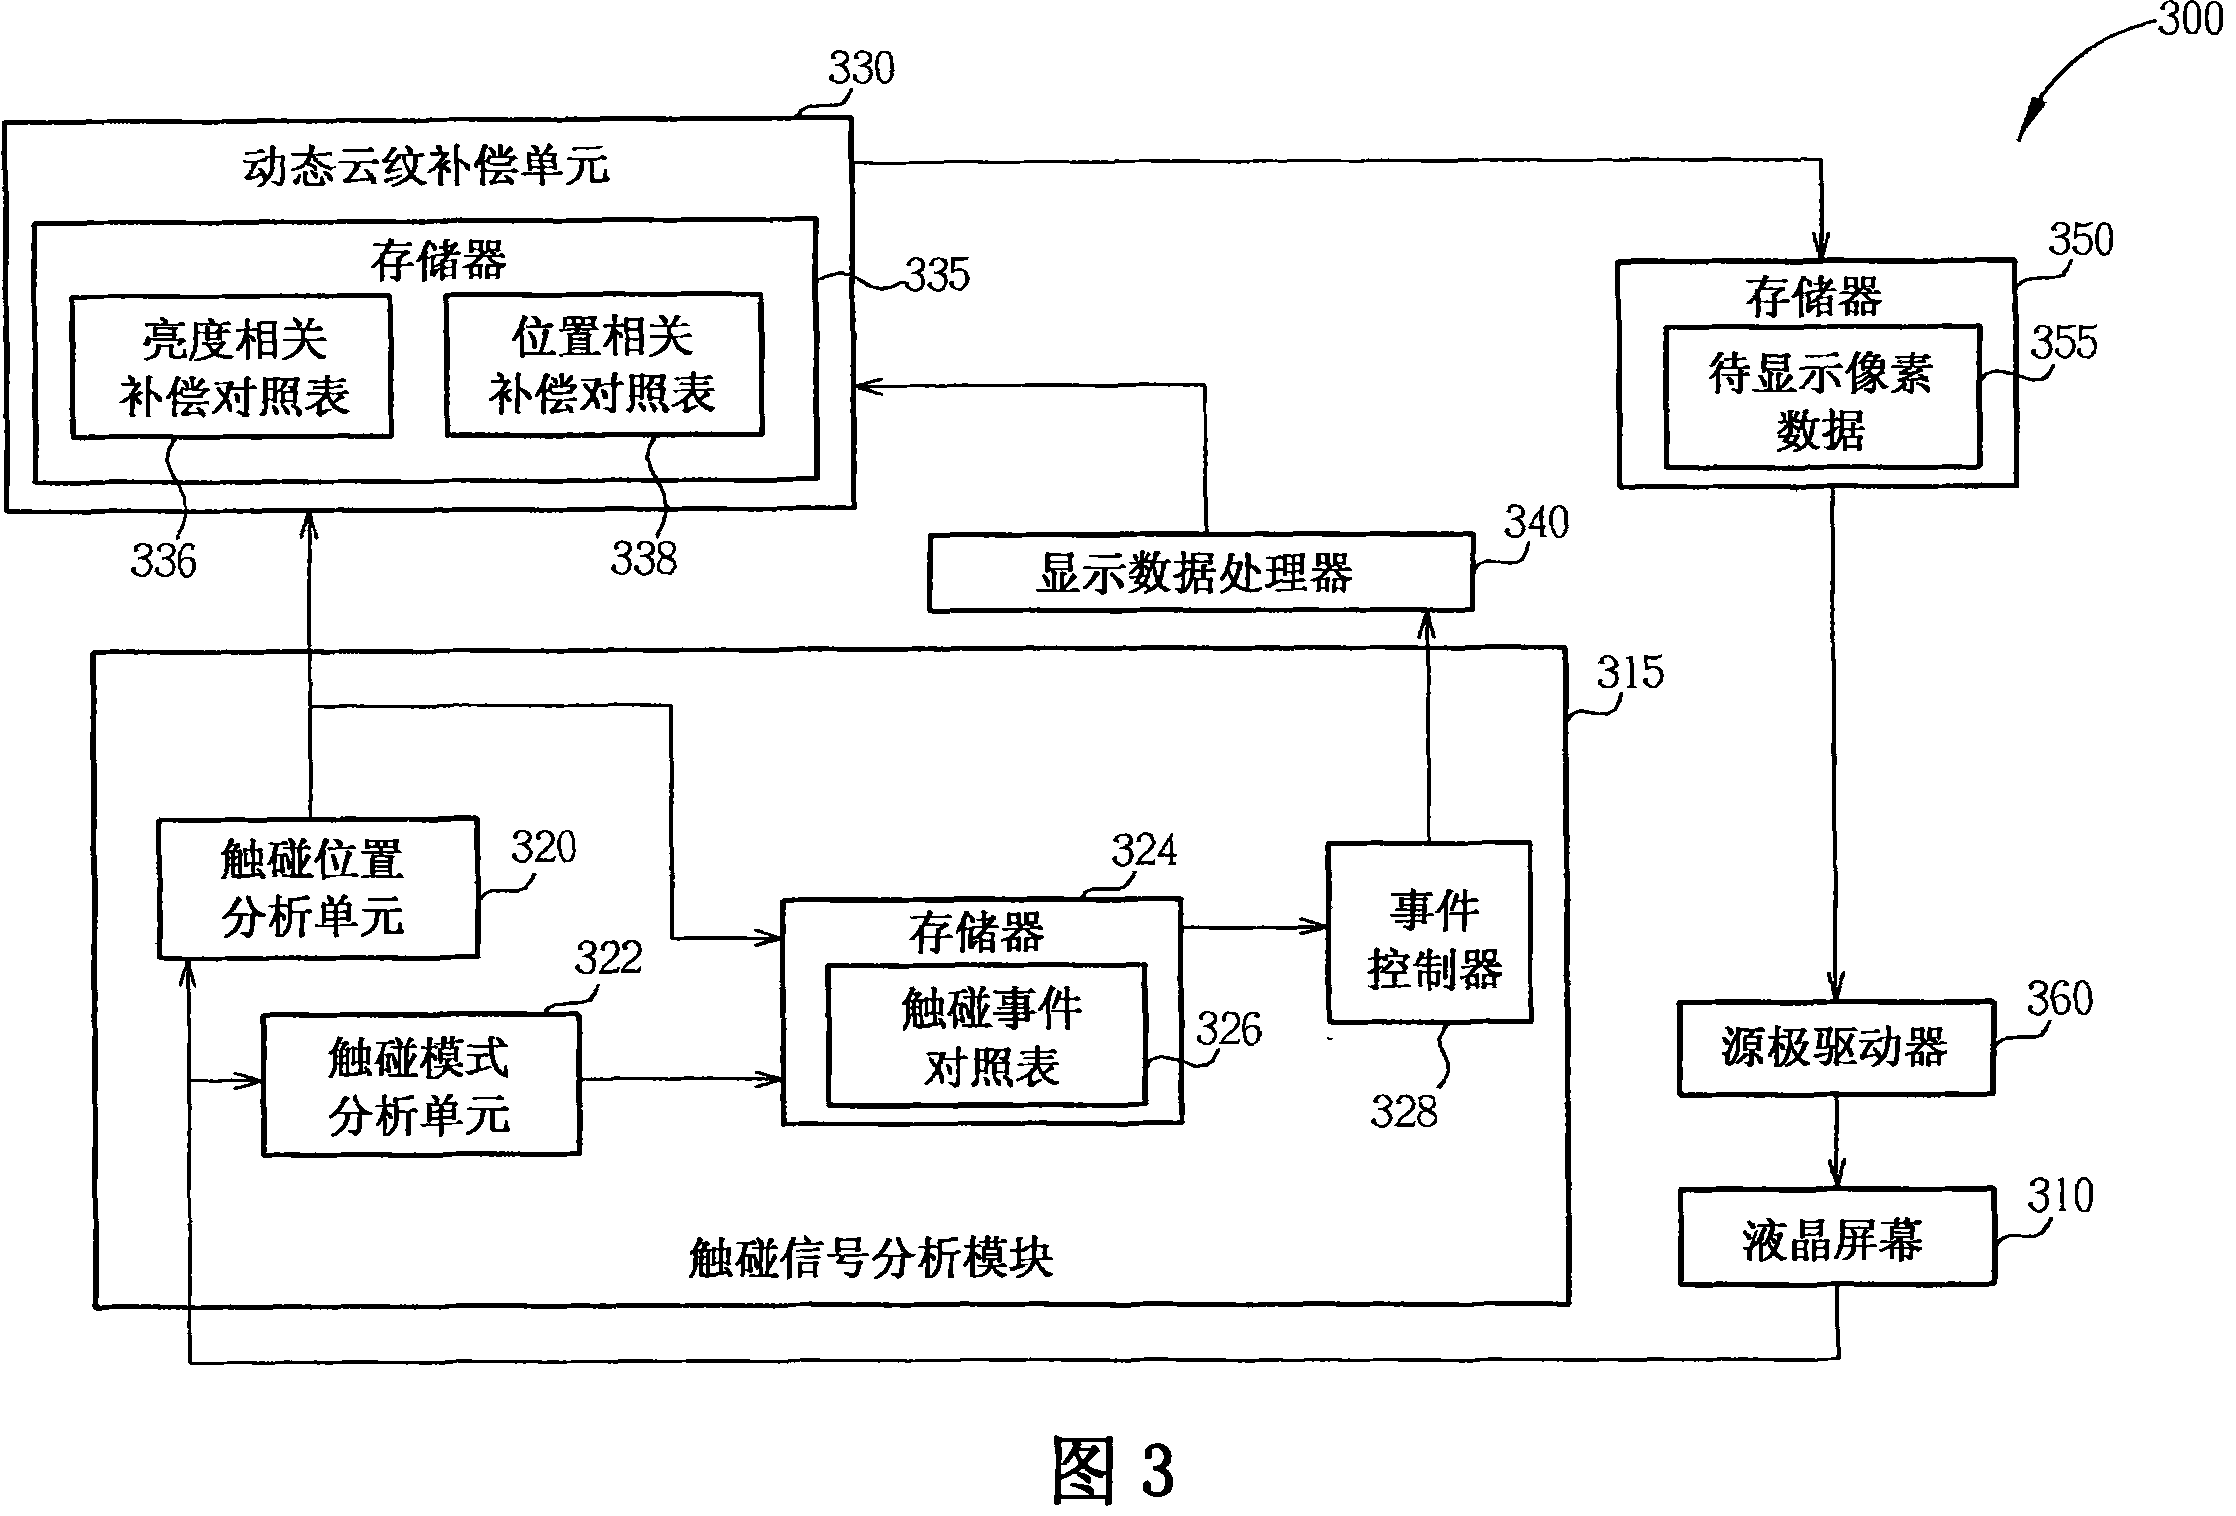 Dynamic touching moire compensation process and related LCD system